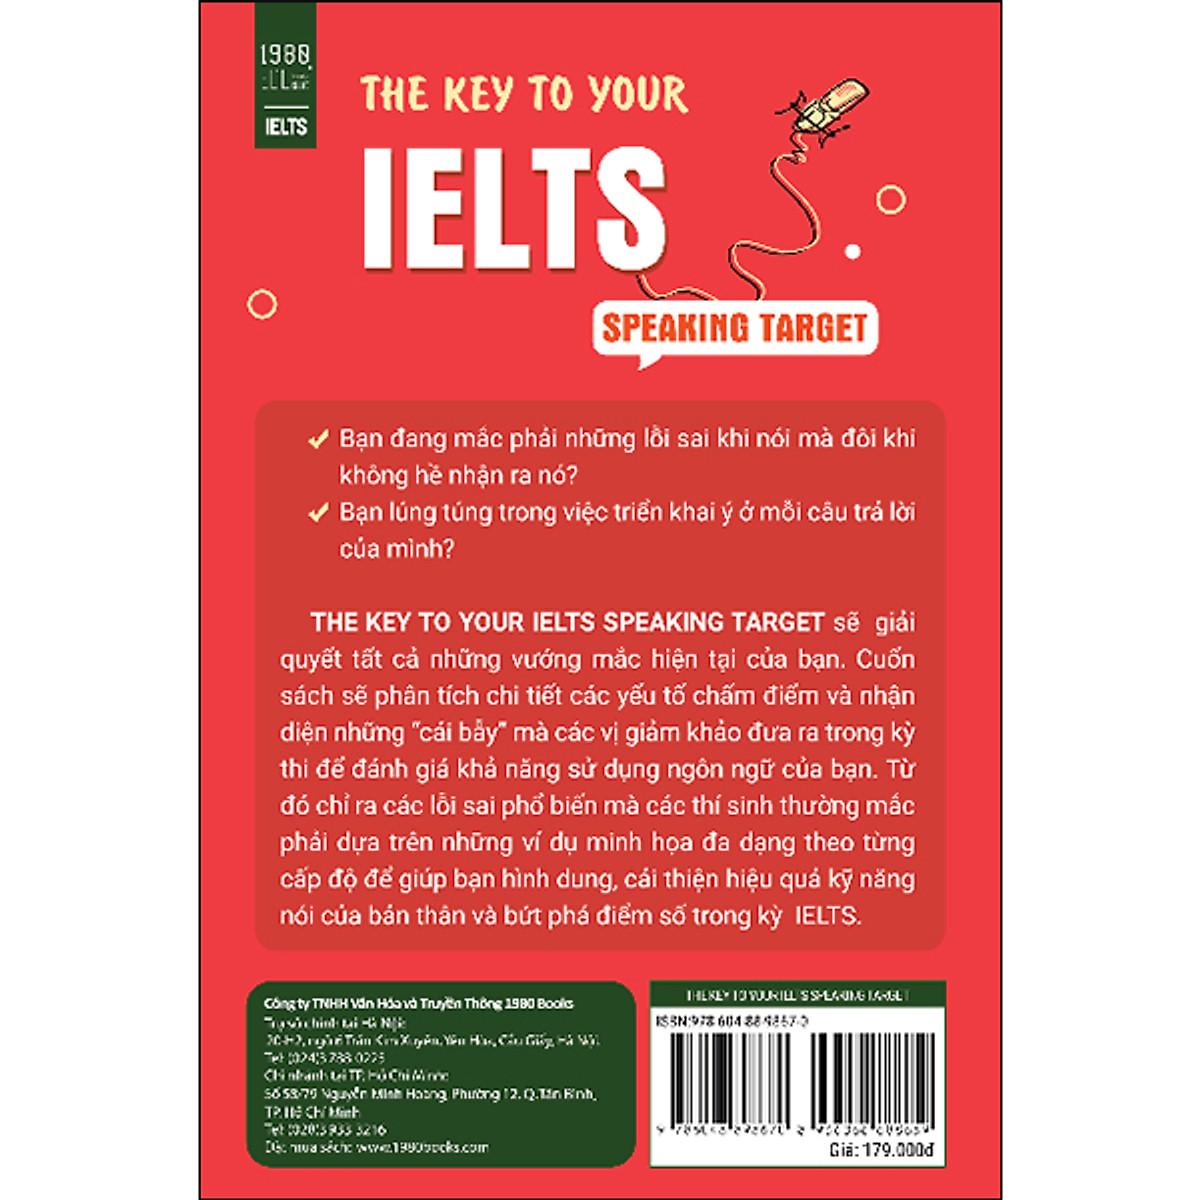 The Key To Your IELTS Speaking Target - Bản Quyền